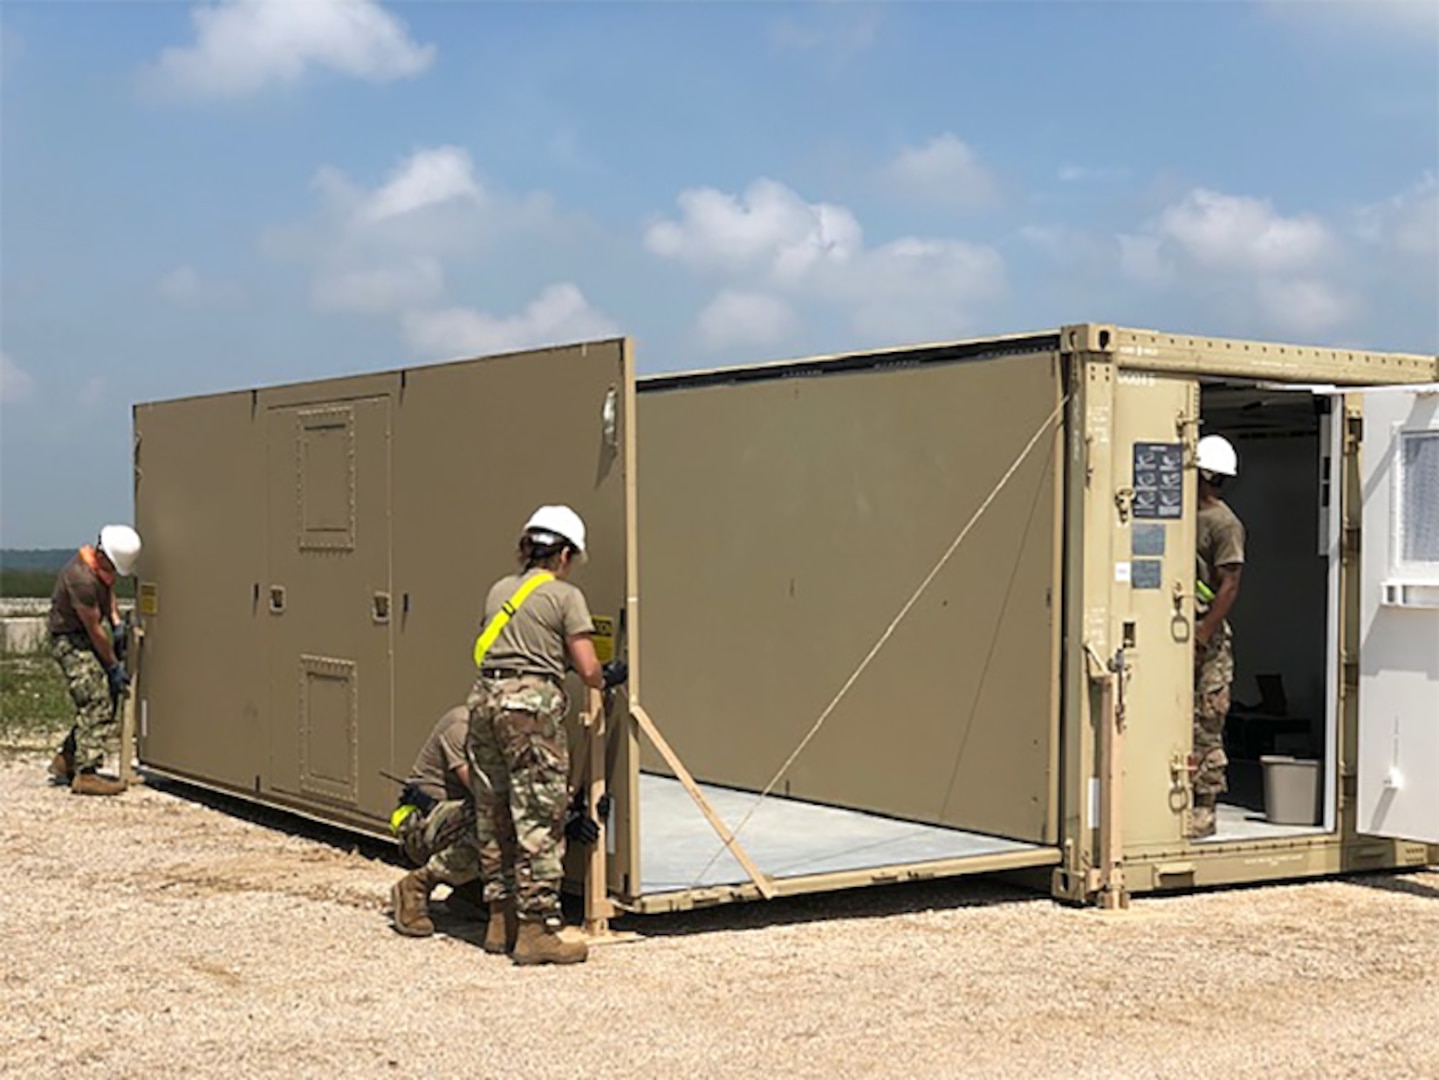 Expeditionary disposal team members prepare a command and control shelter at Camp Bondsteel in Kosovo. The military-civilian team will spend two weeks in the Slavic nation helping U.S. Army units discard a wide variety of accumulated used materiel.